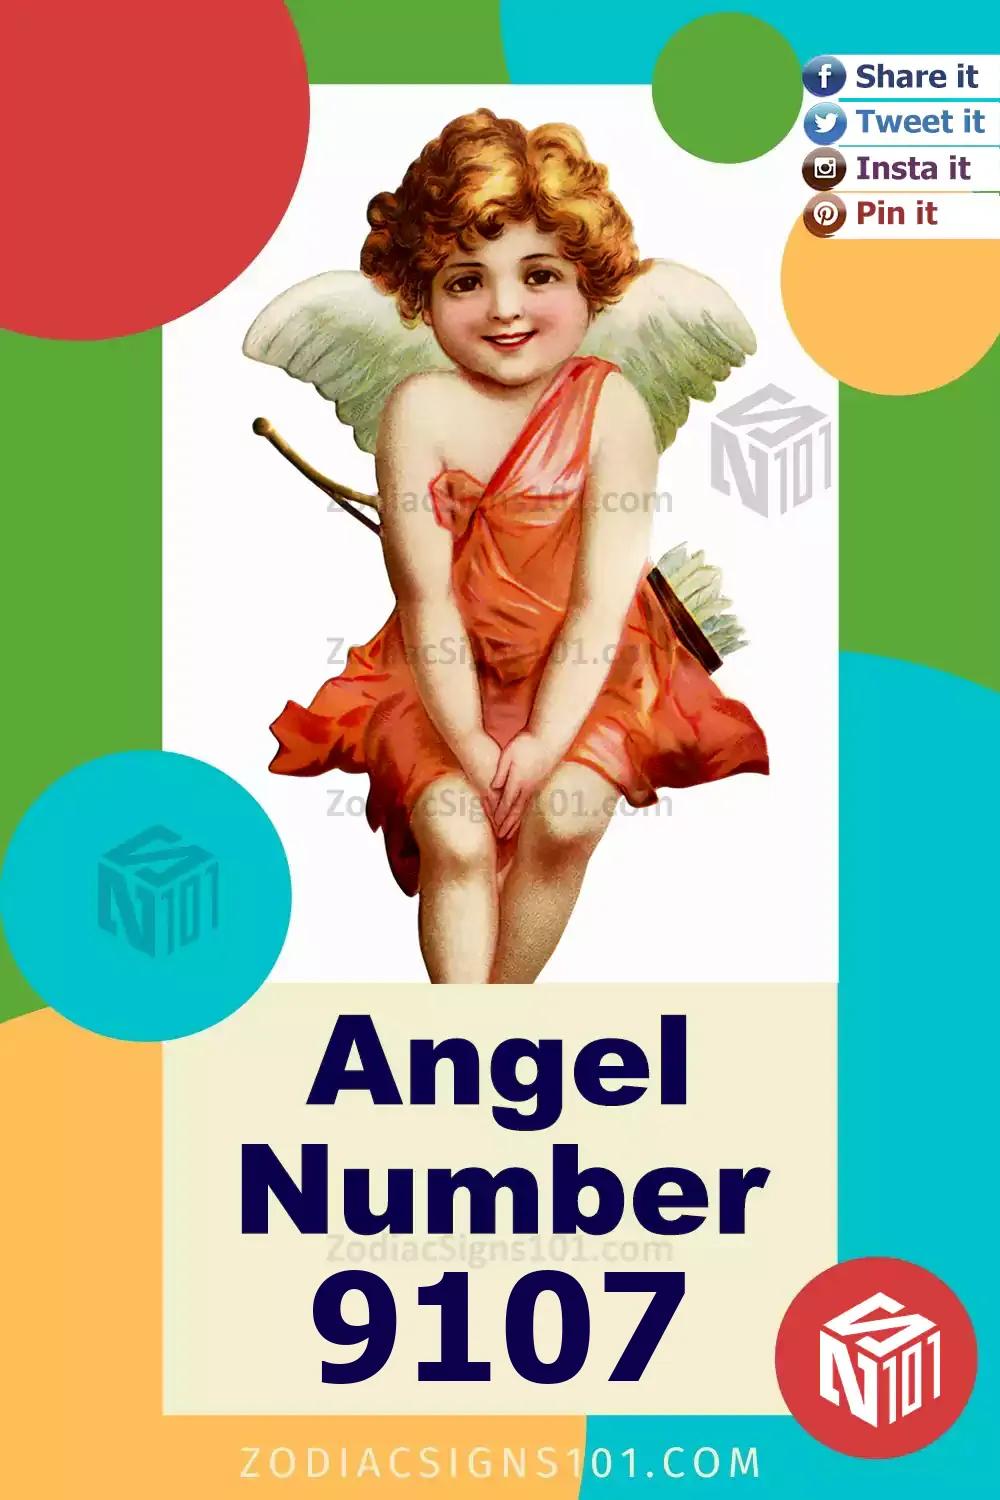 9107 Angel Number Meaning